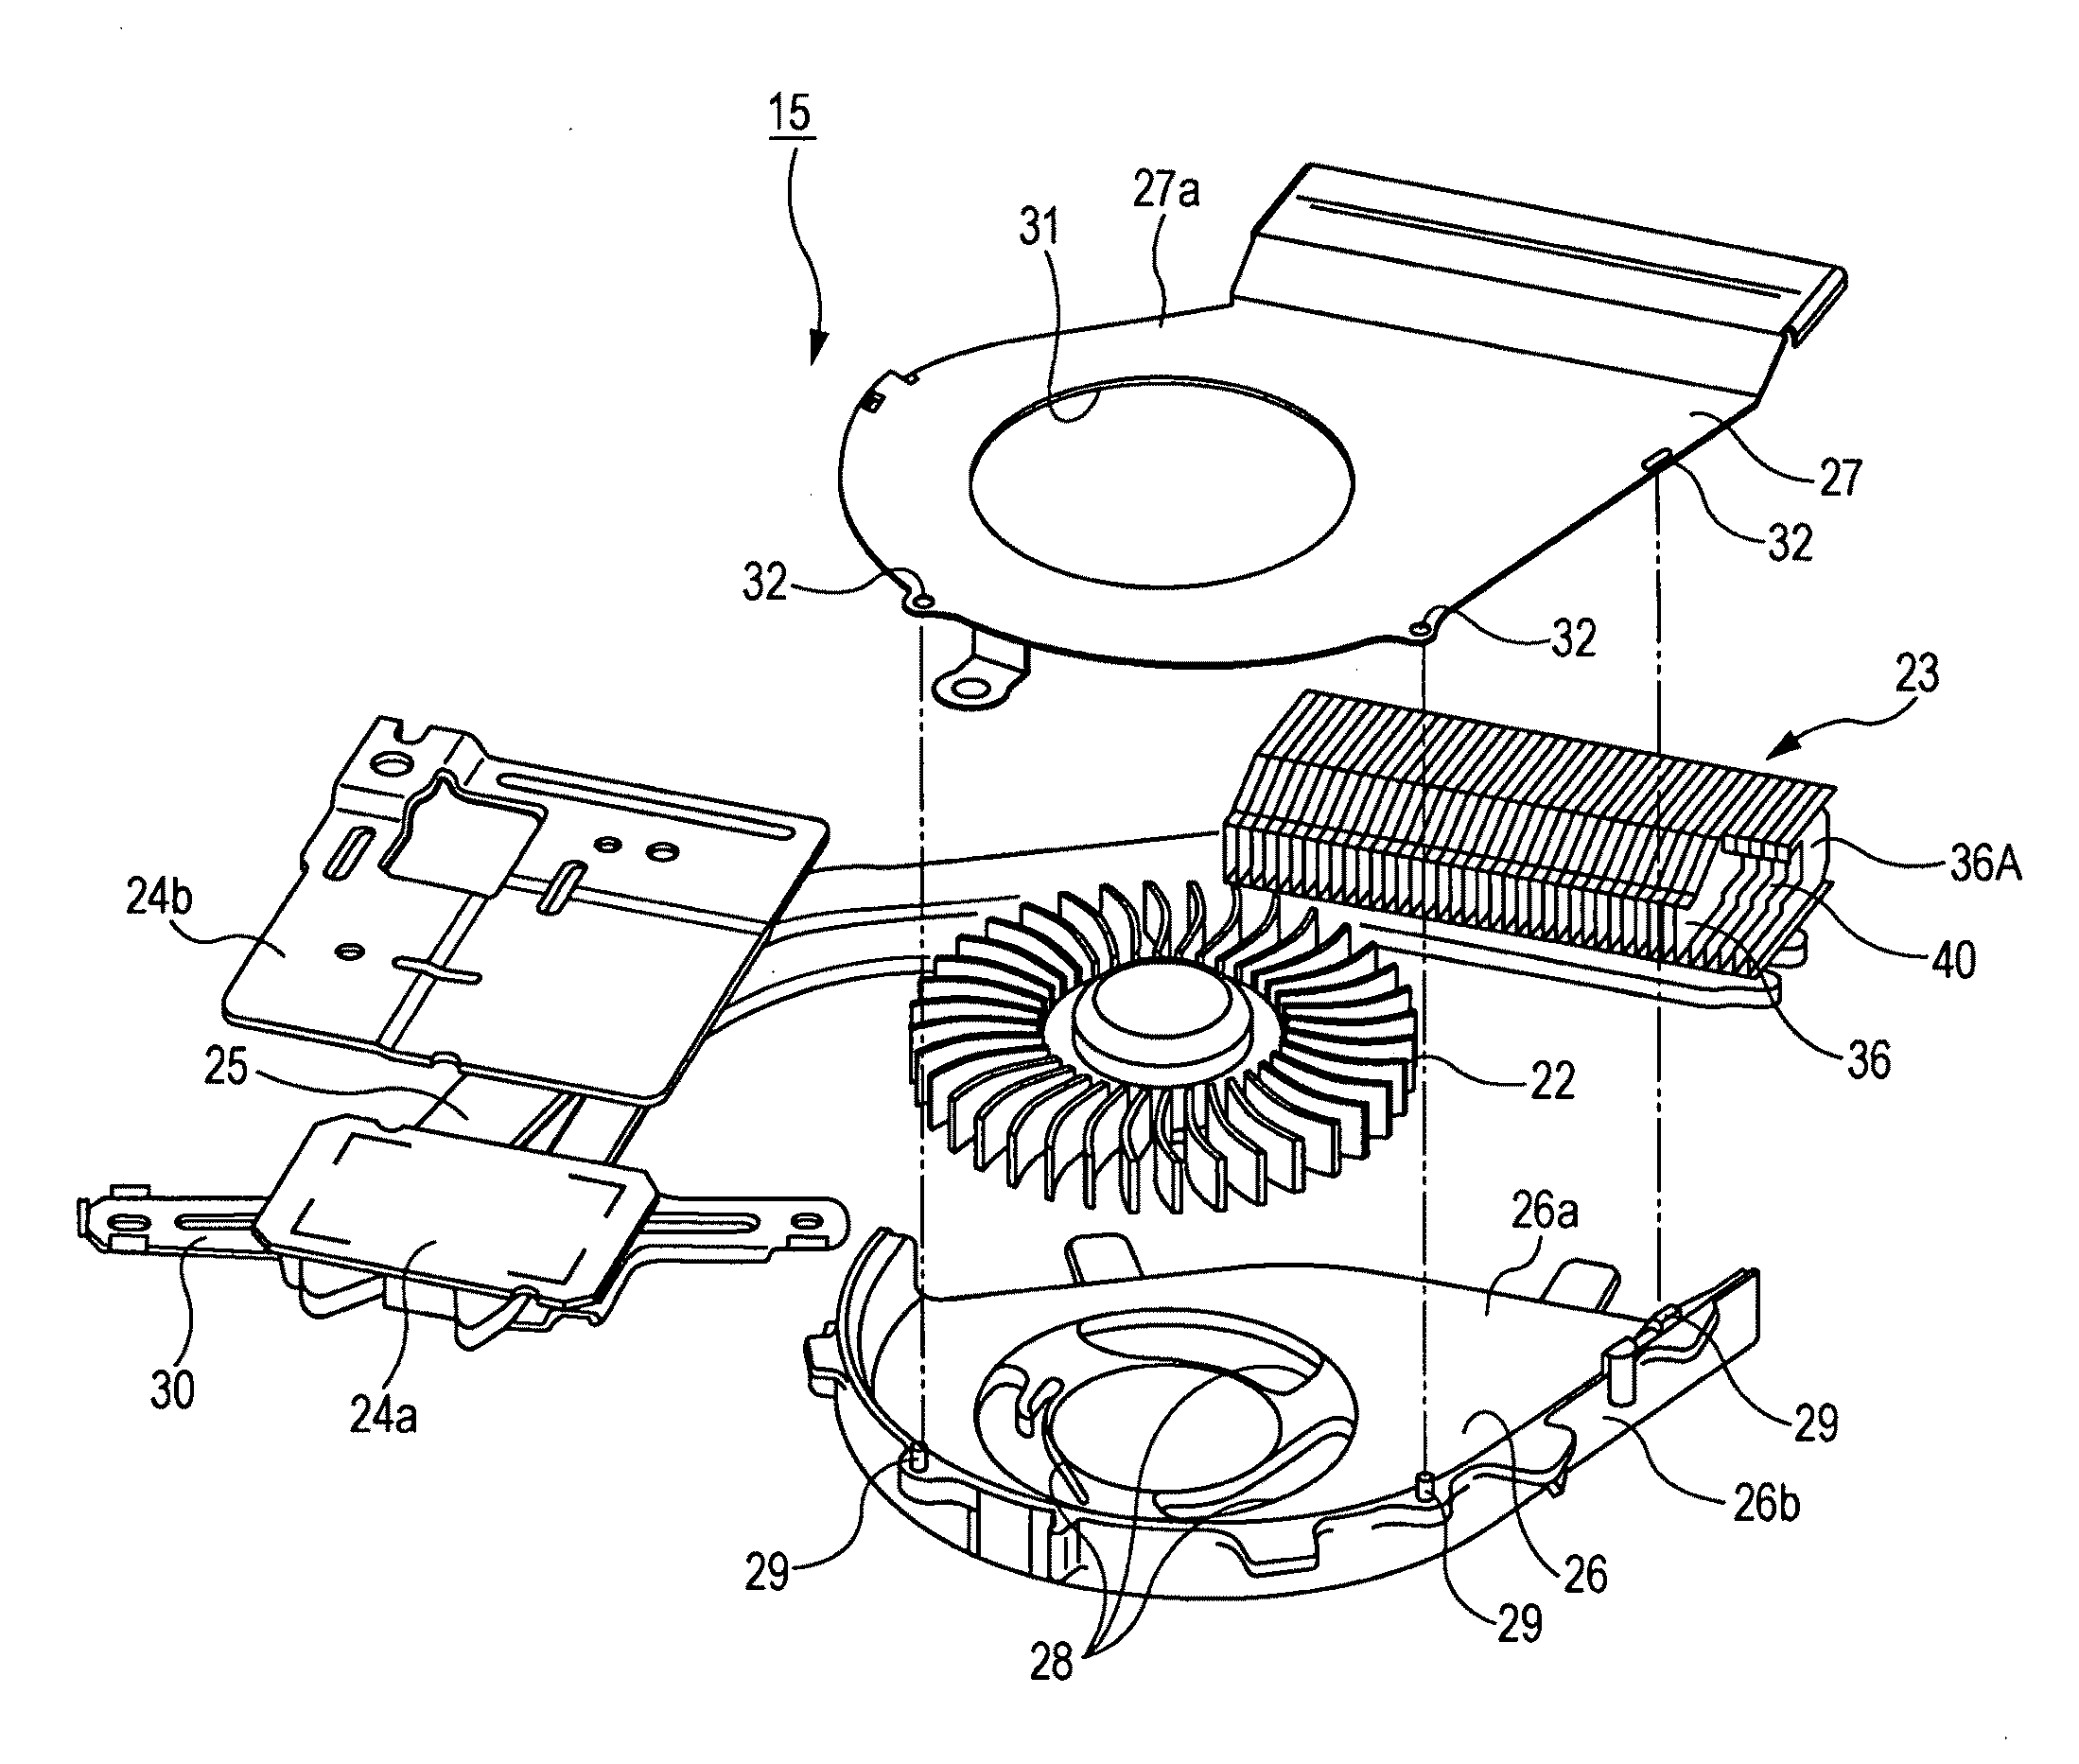 Cooling unit, electronic device, and heat sink